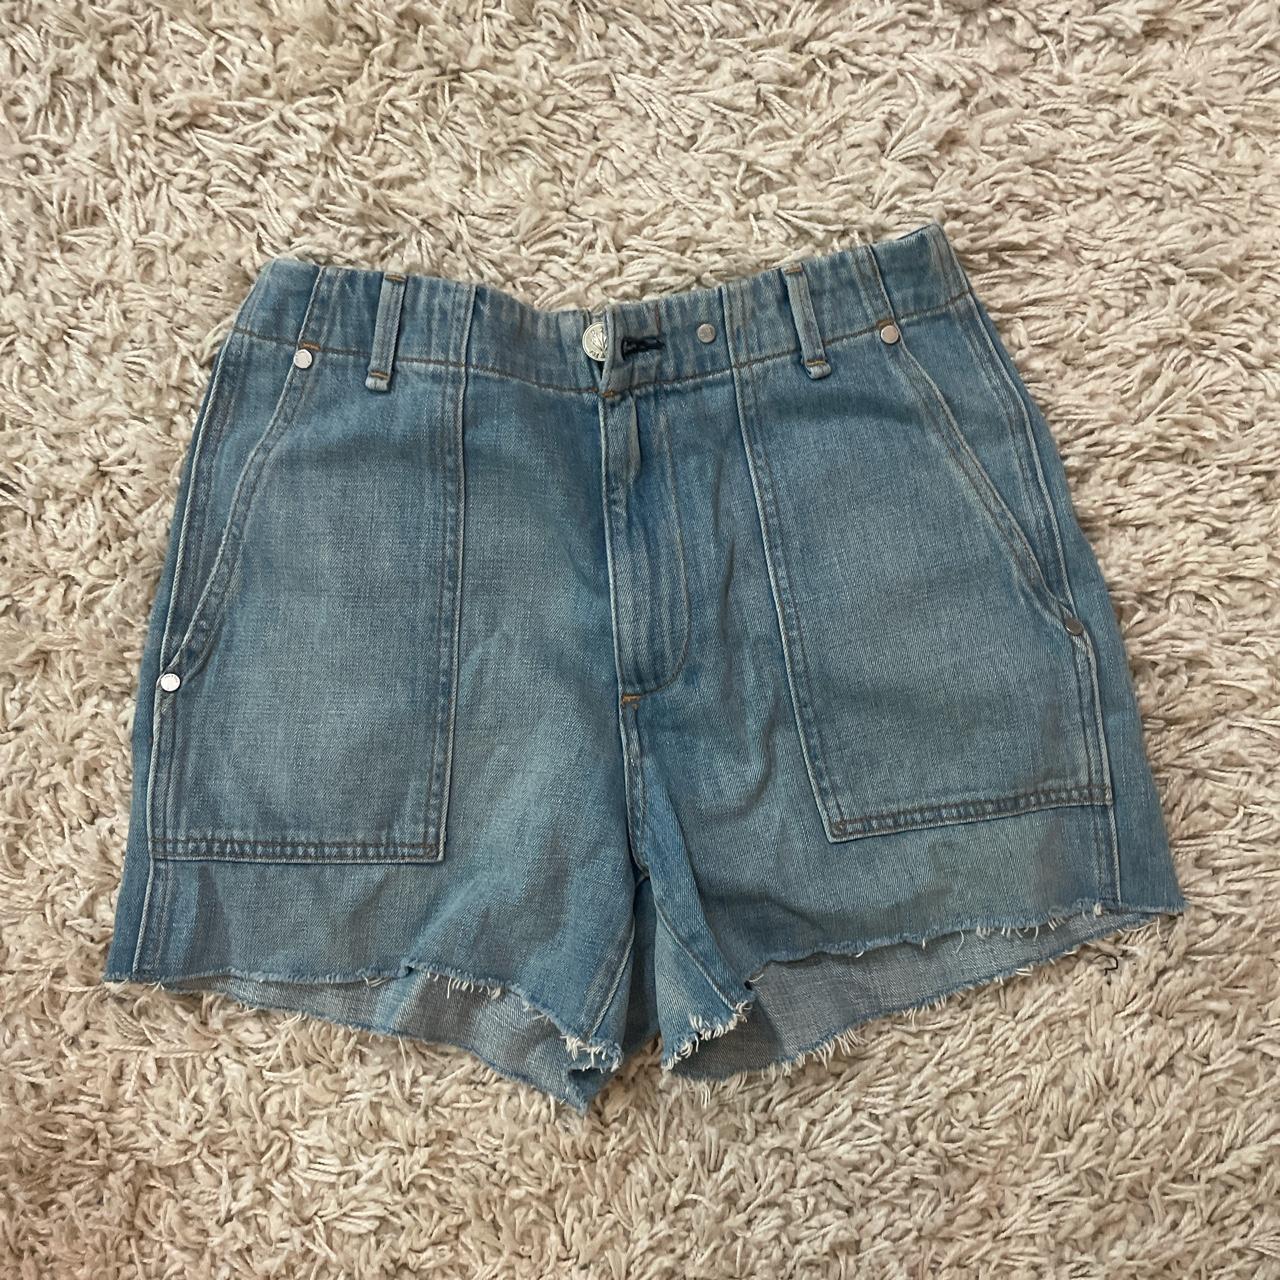 2022 Designer Denim Shorts For Women Sexy Fashion Clothing With Short Pants  And Denim Look Leggings From Bosslala, $10.06 | DHgate.Com